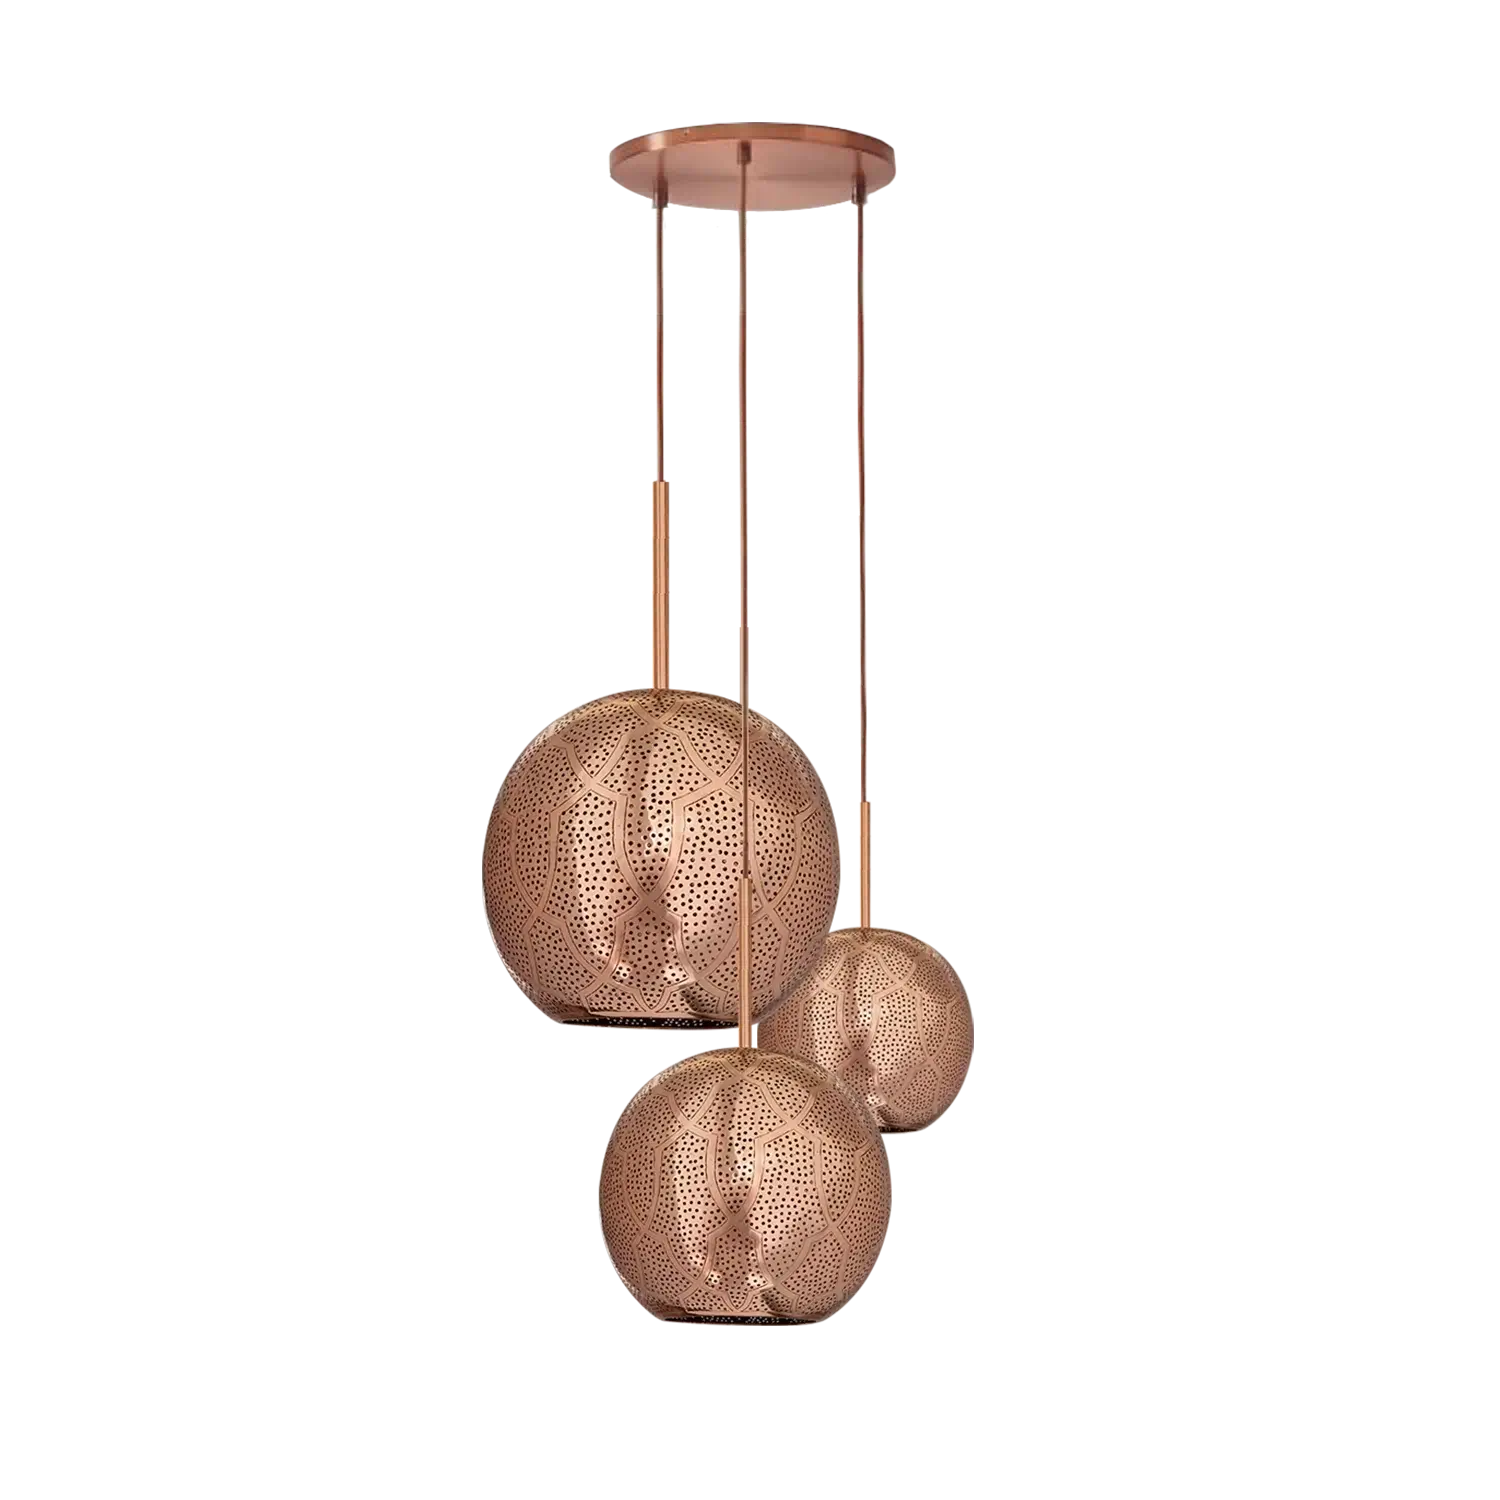 Dounia home Chandelier in polished copper  made of Metal, Model: Ari